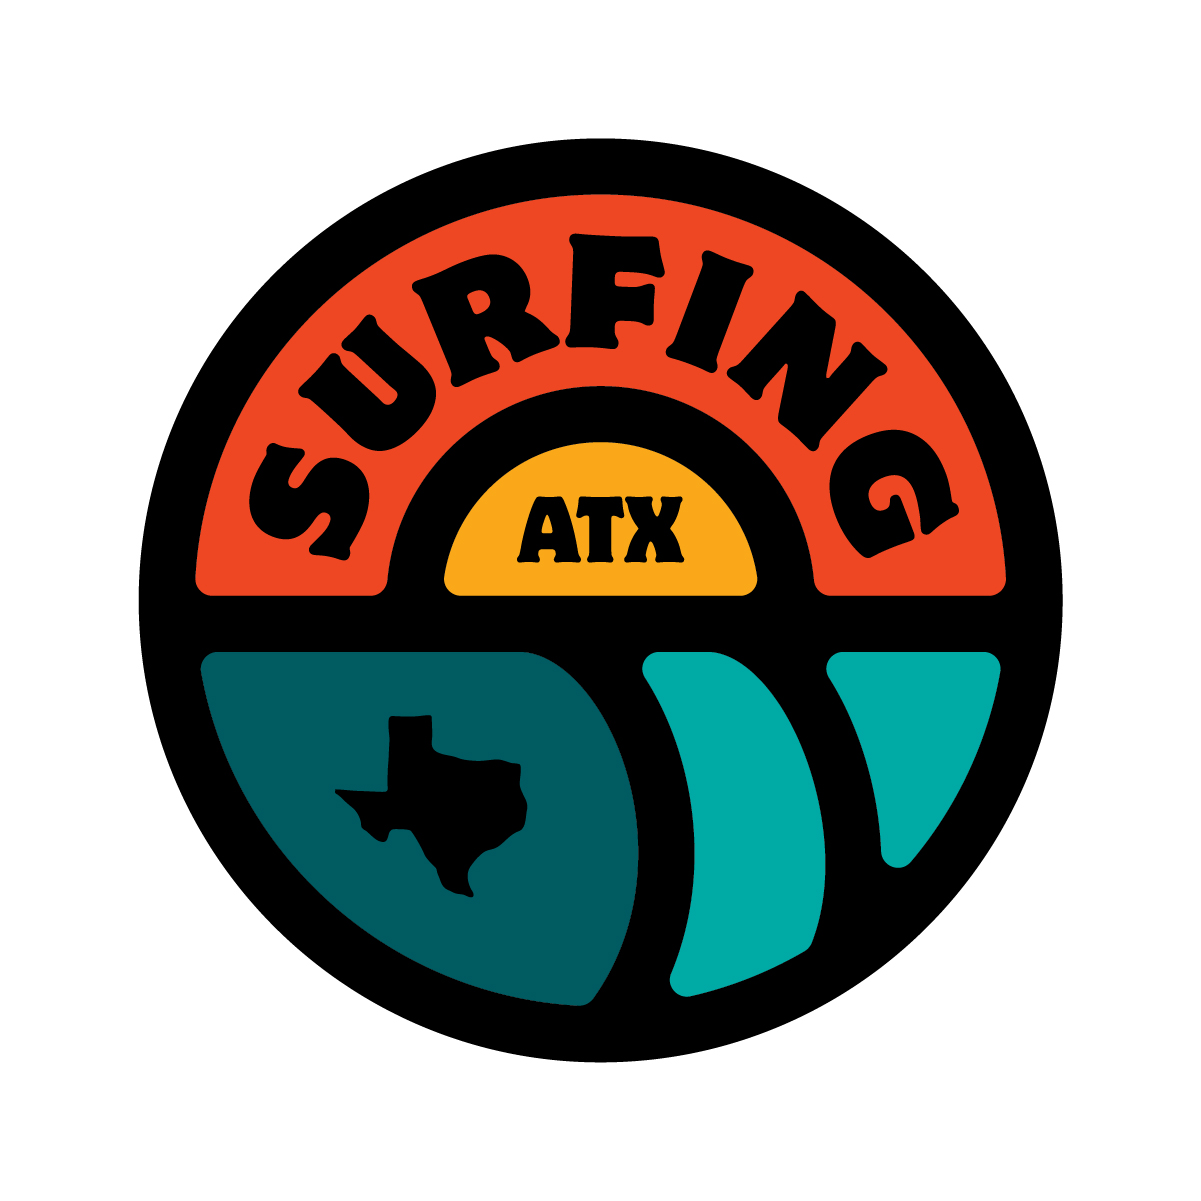 Surfing ATX logo design by logo designer Chad Ehlinger for your inspiration and for the worlds largest logo competition